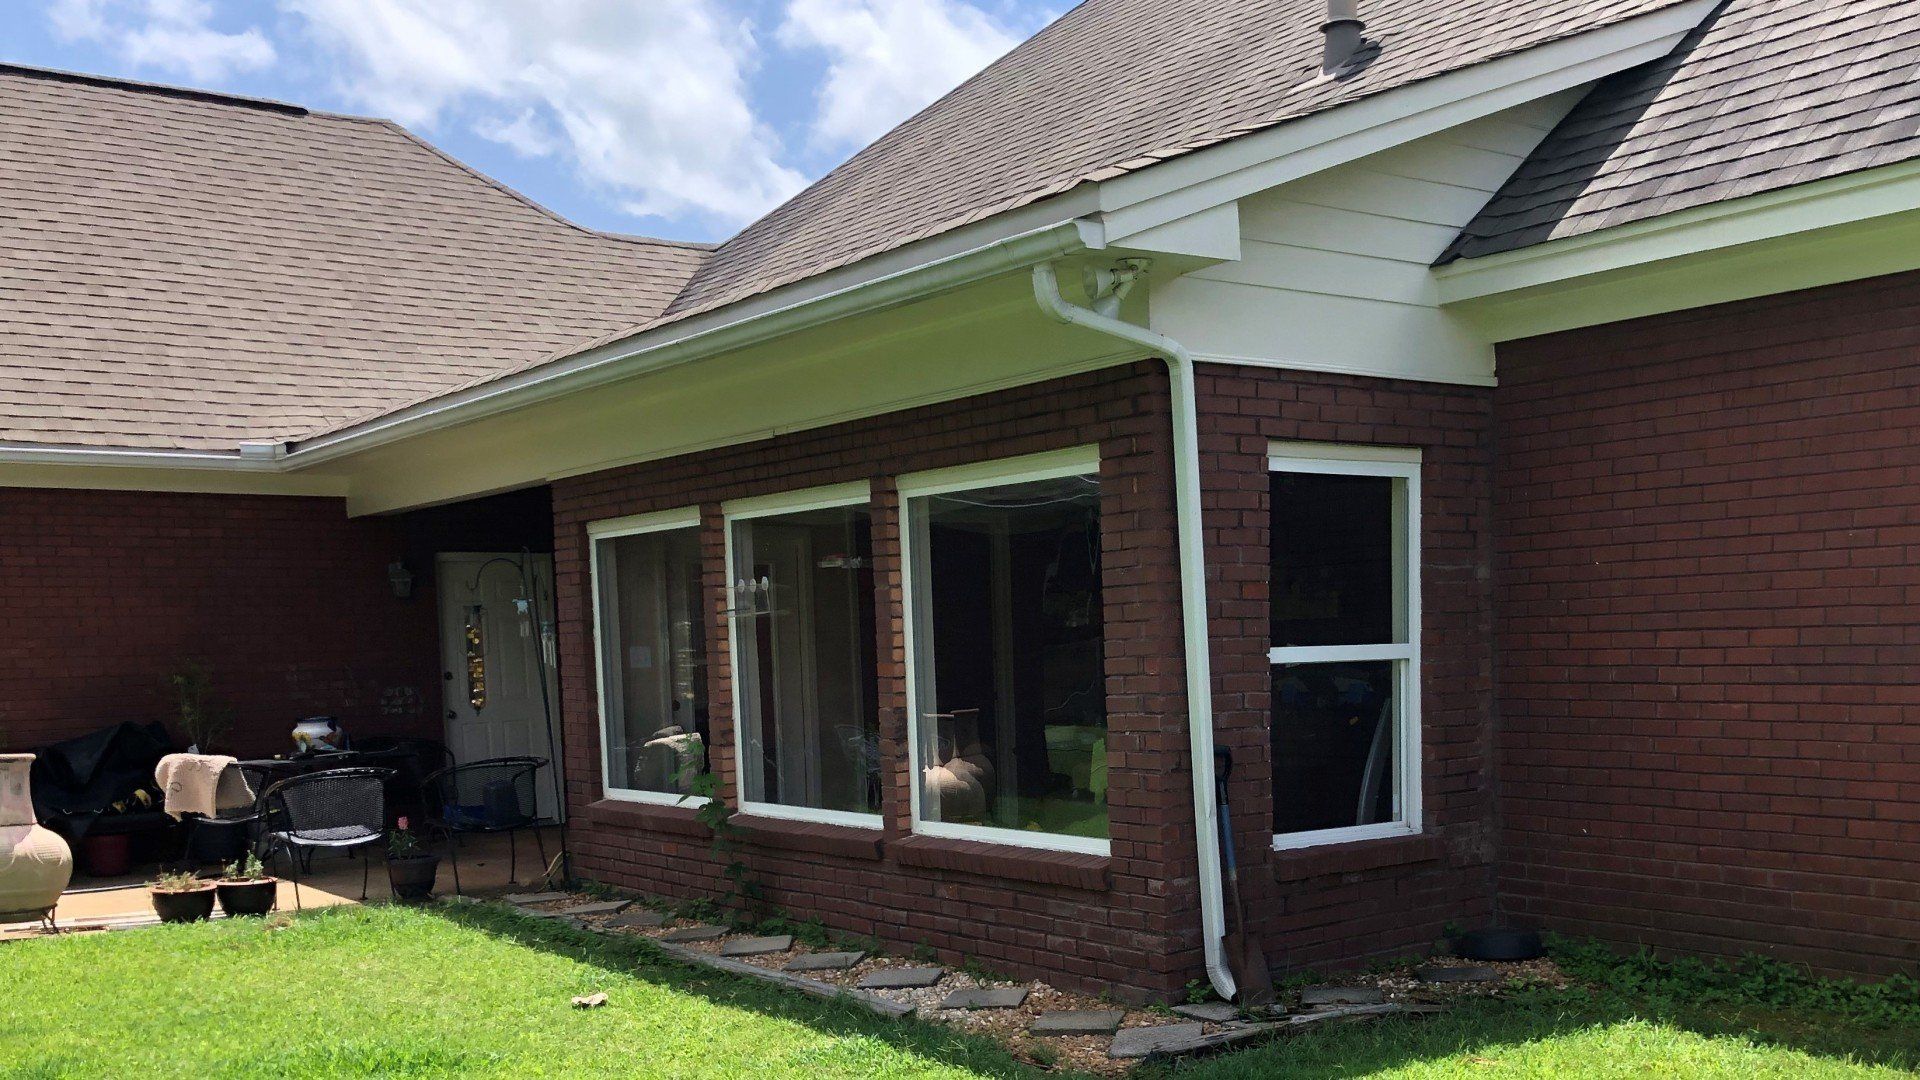 SPF Residential Tint installation on 7.16.2019 - Home window tint in Montgomery, AL